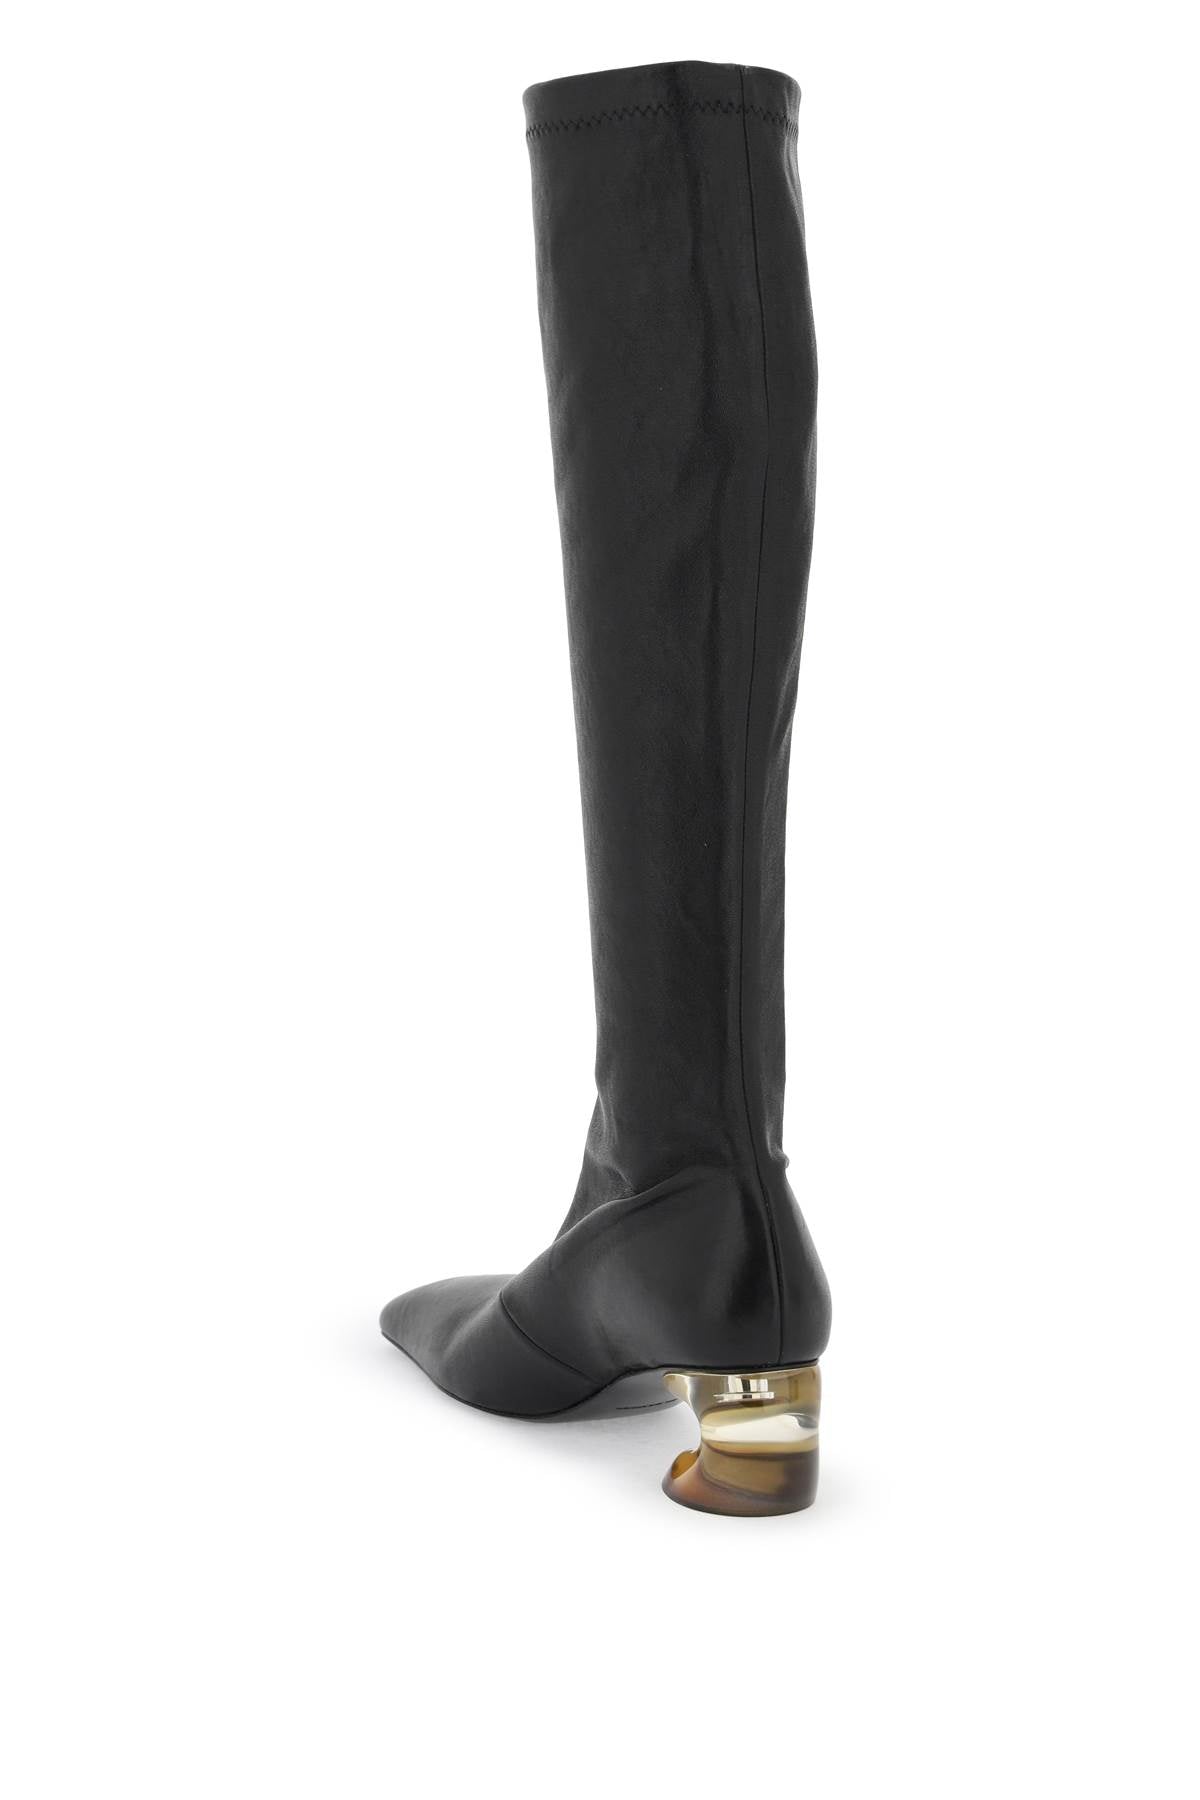 JIL SANDER Sleek and Sophisticated Stretch Leather Boots for Women